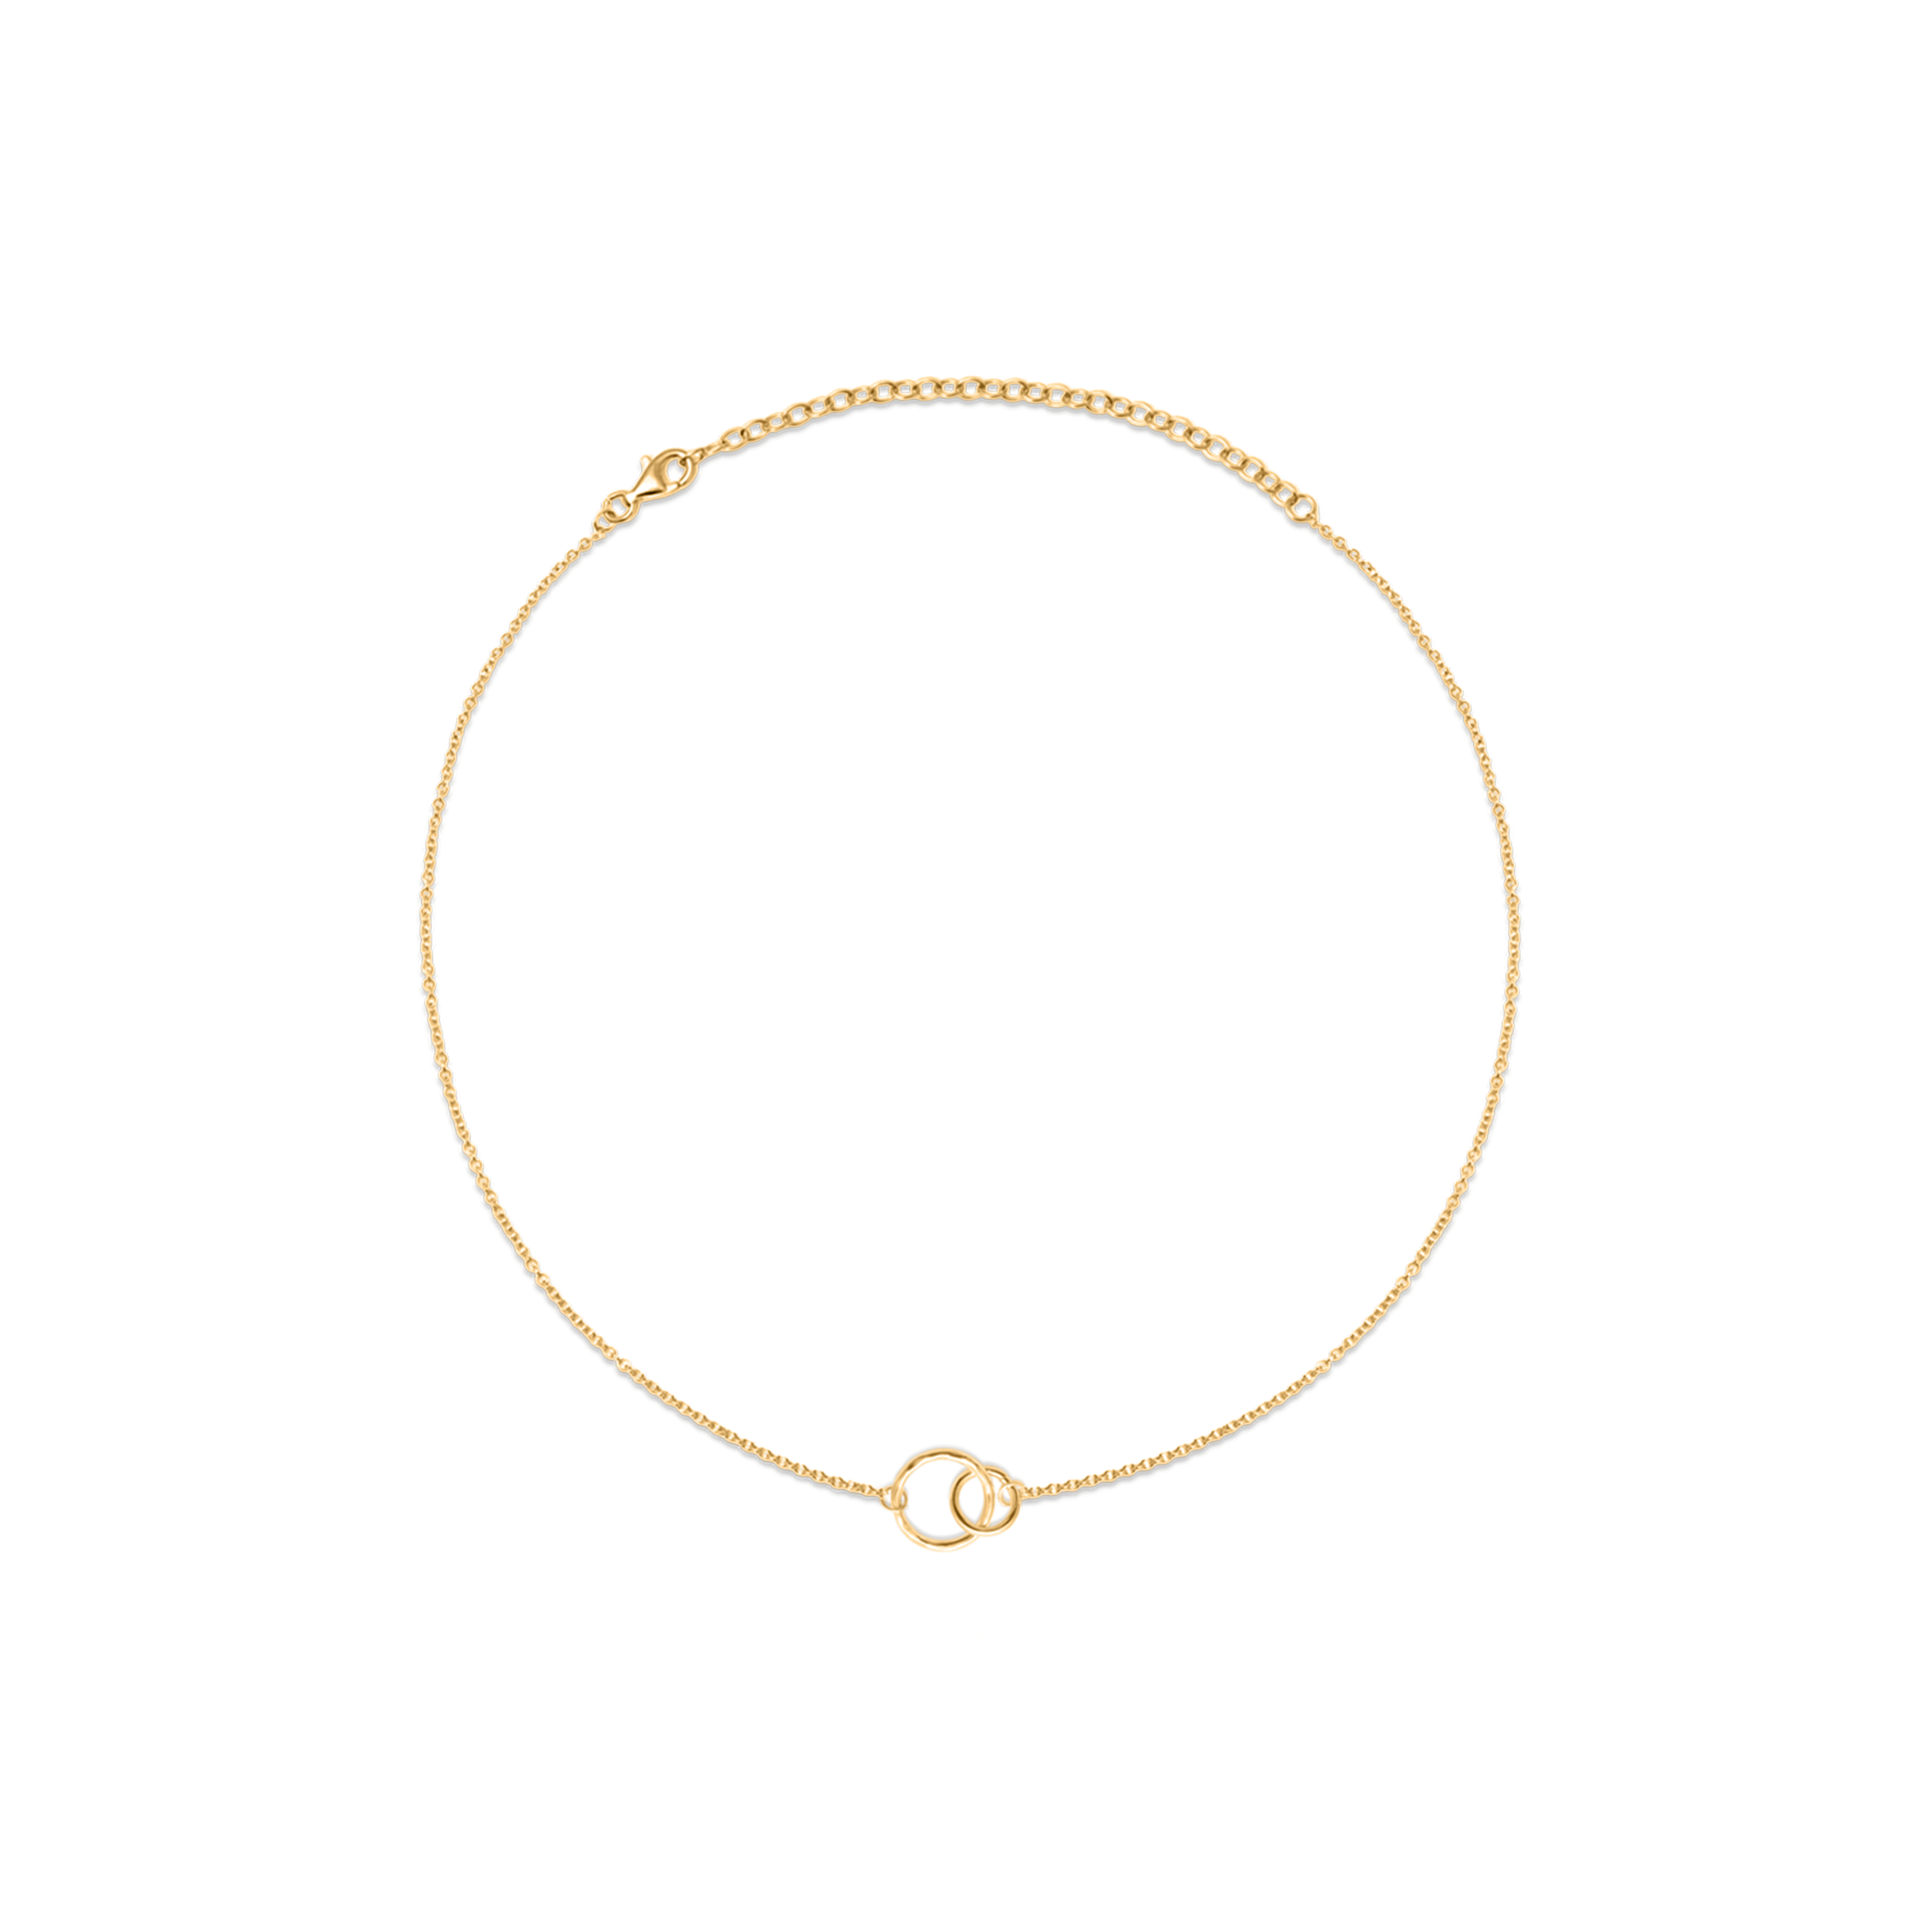 The Two of Us Choker Jewelry ella-thebee 925 Silver Gold Plated 